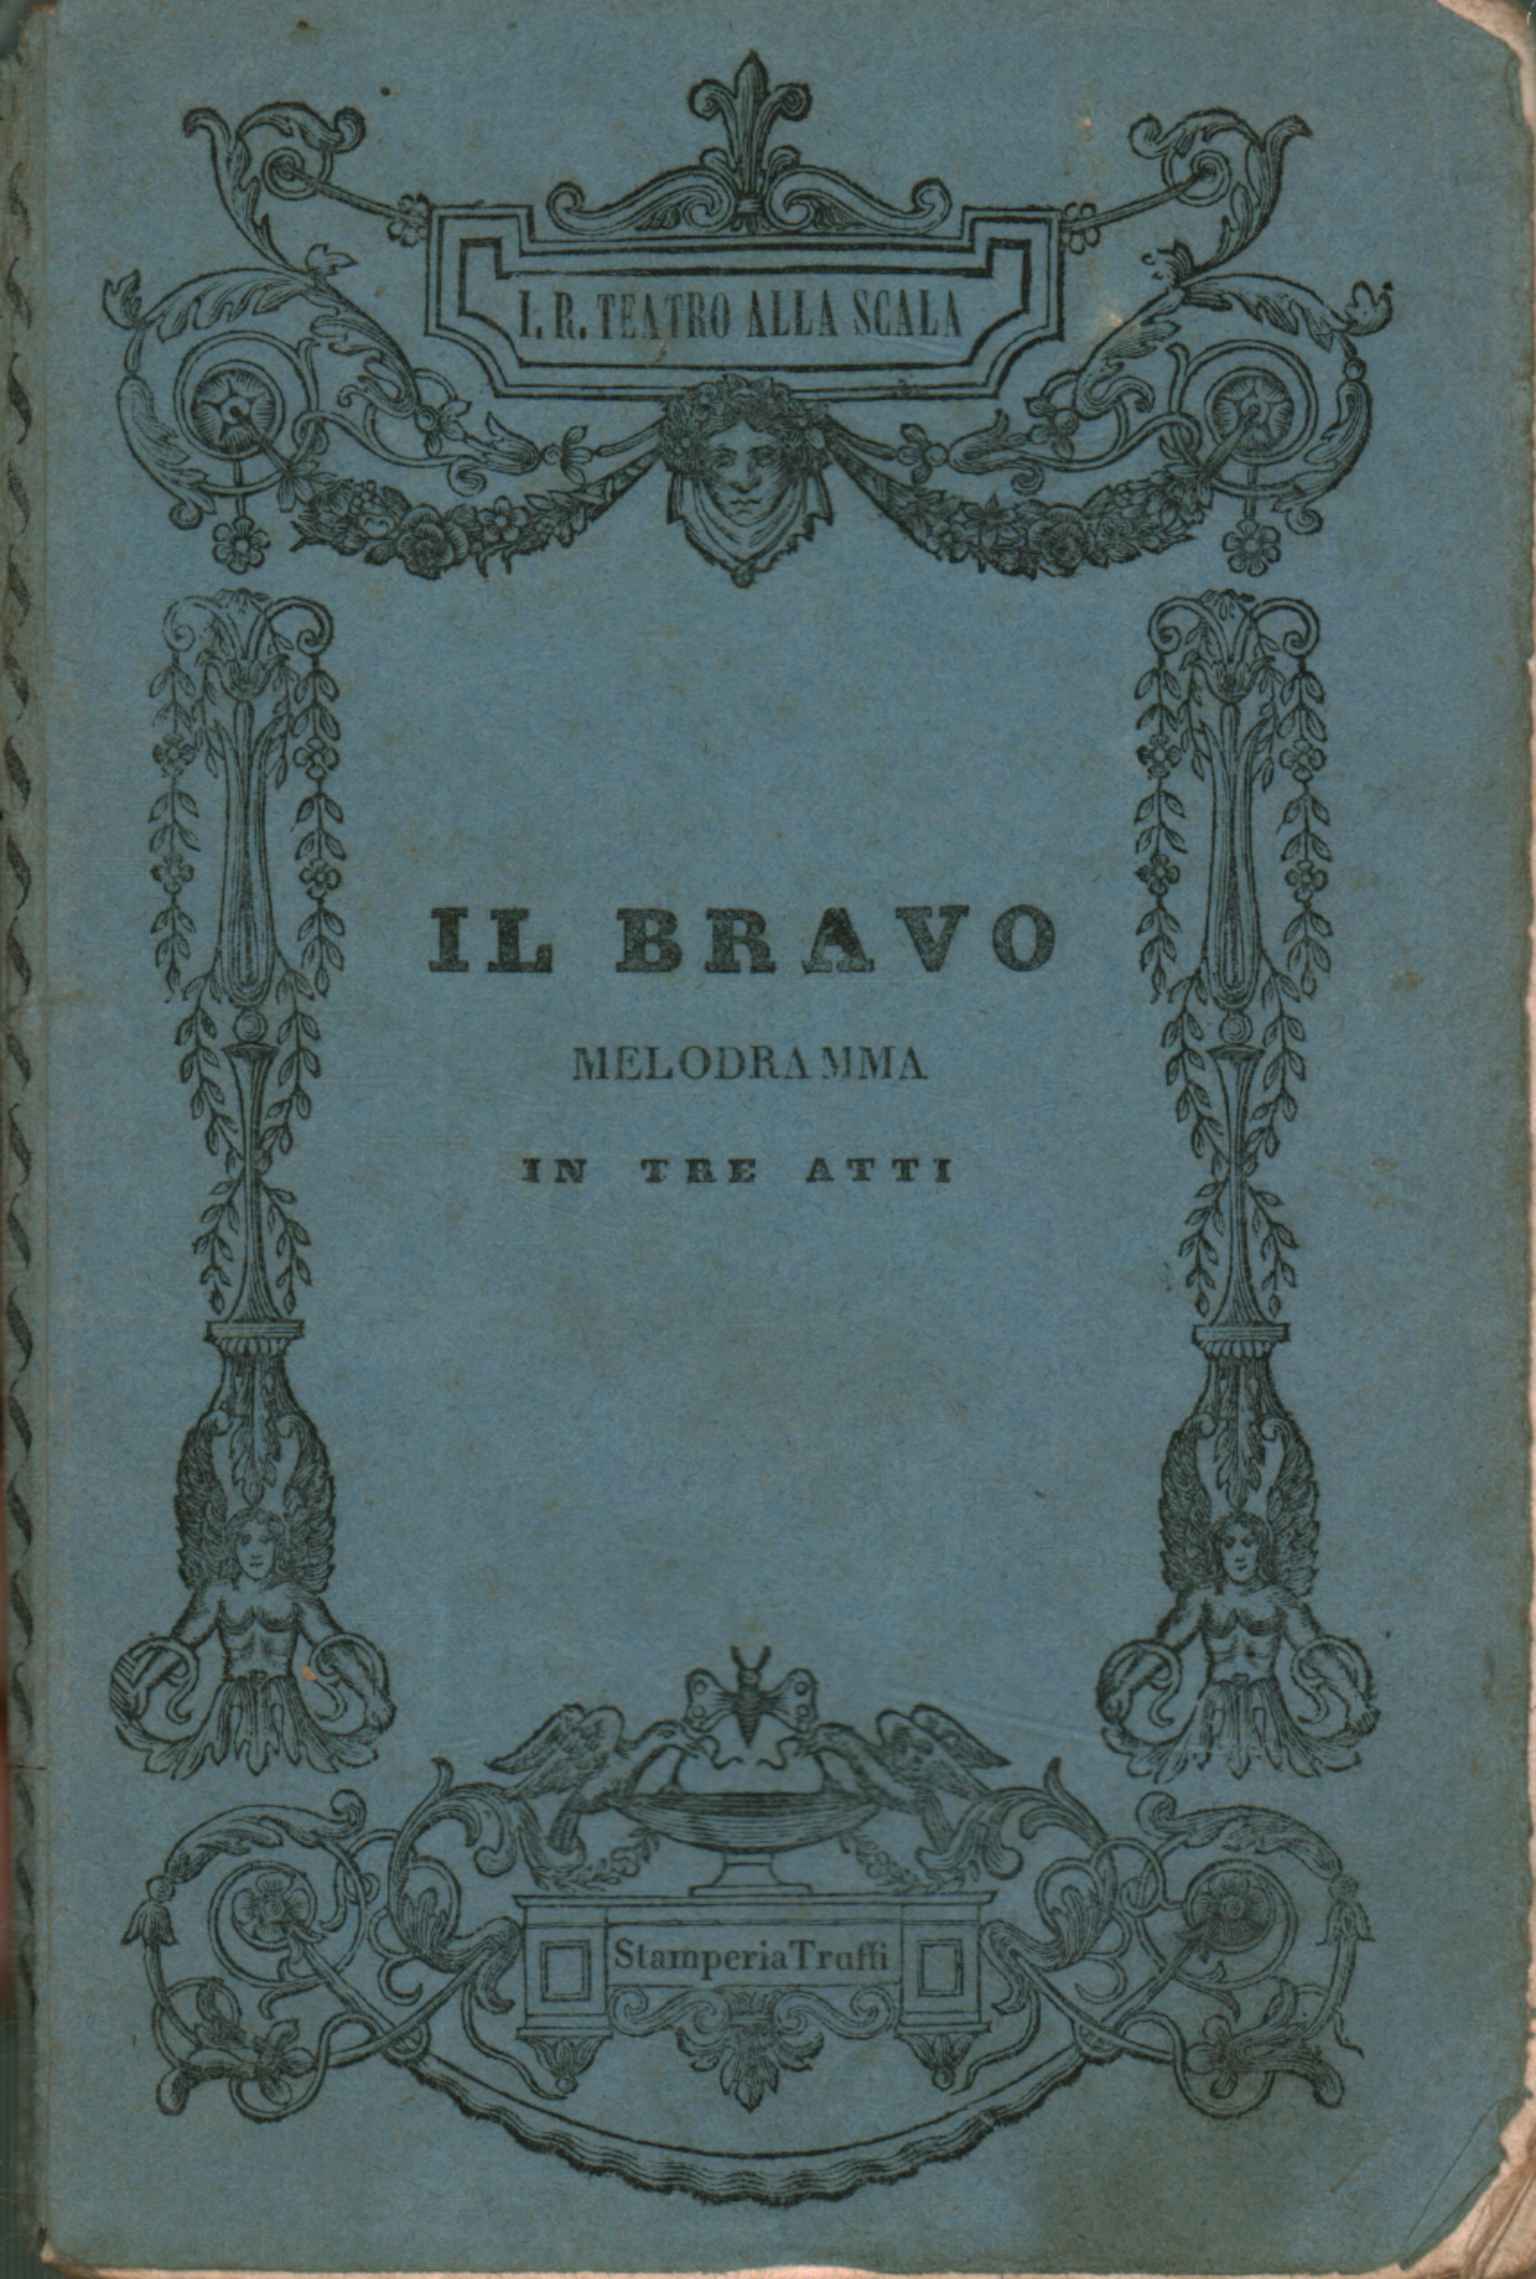 Il Bravo Melodrama in three acts by r